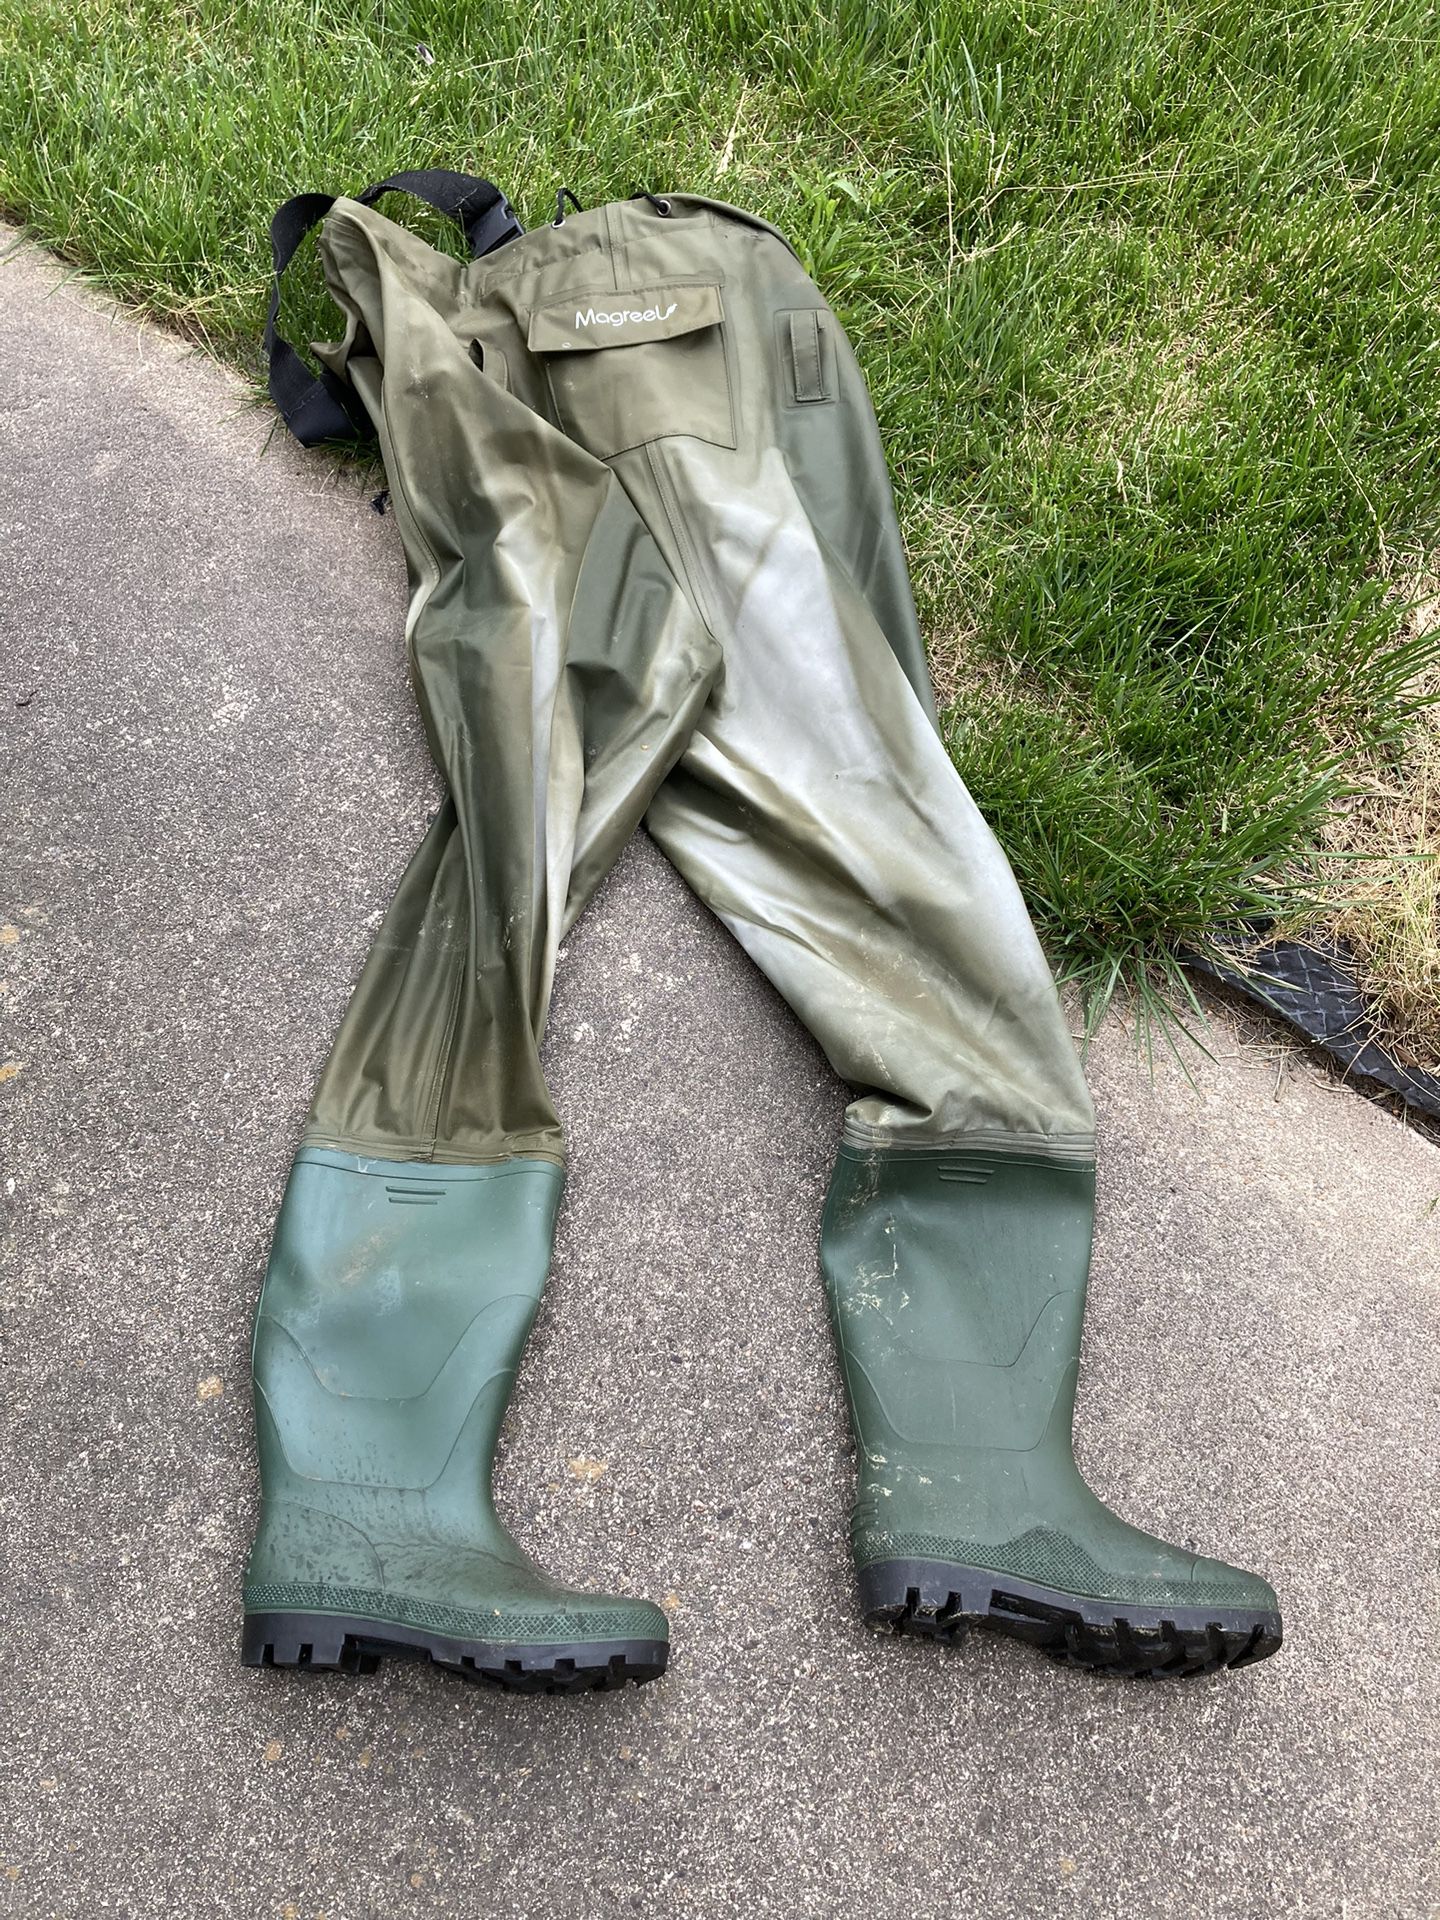 Magreel Waders Size 10 for Sale in Chesapeake, VA - OfferUp